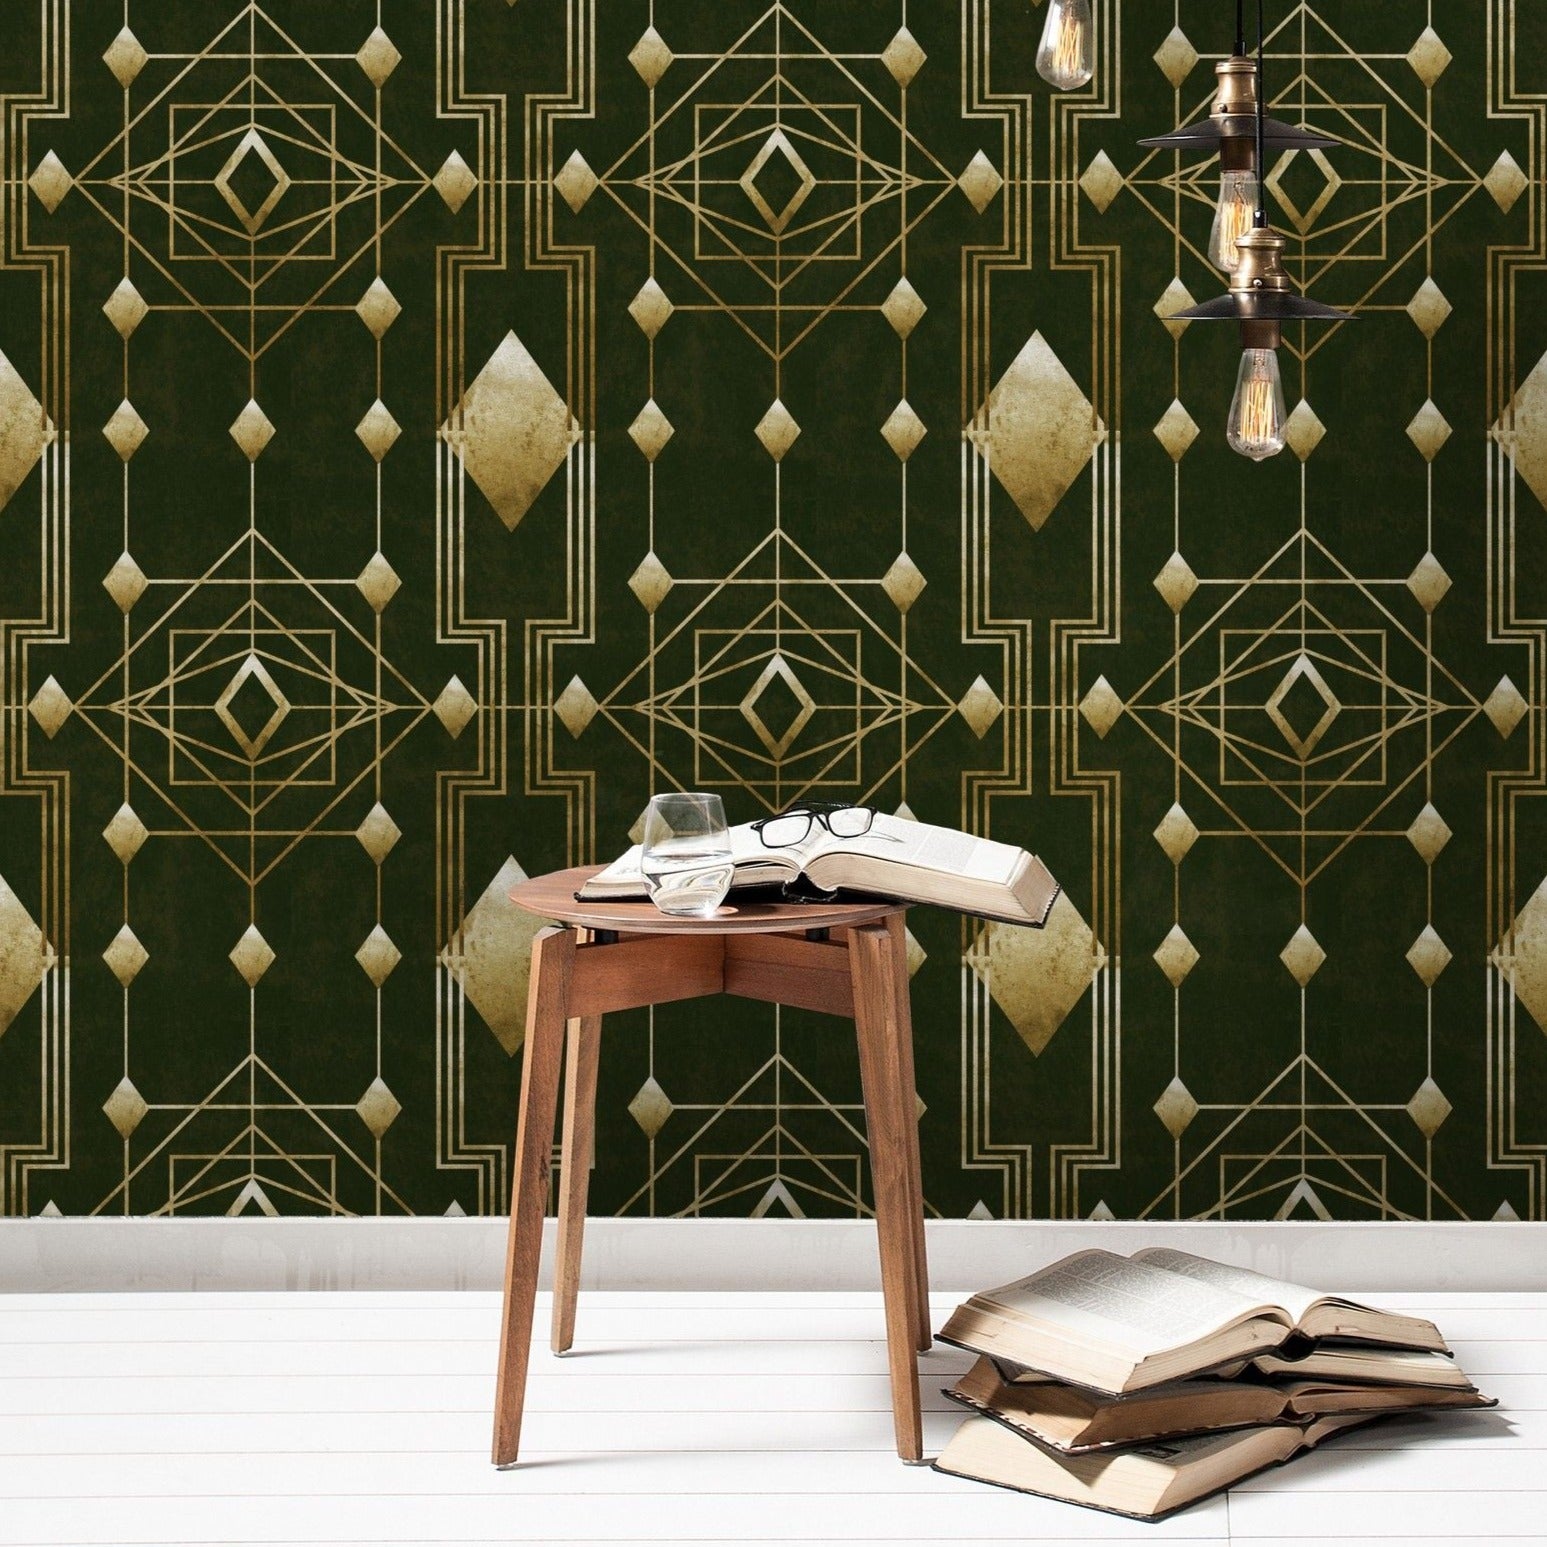 THE GREAT GATSBY Wallpapers  FilmoFilia